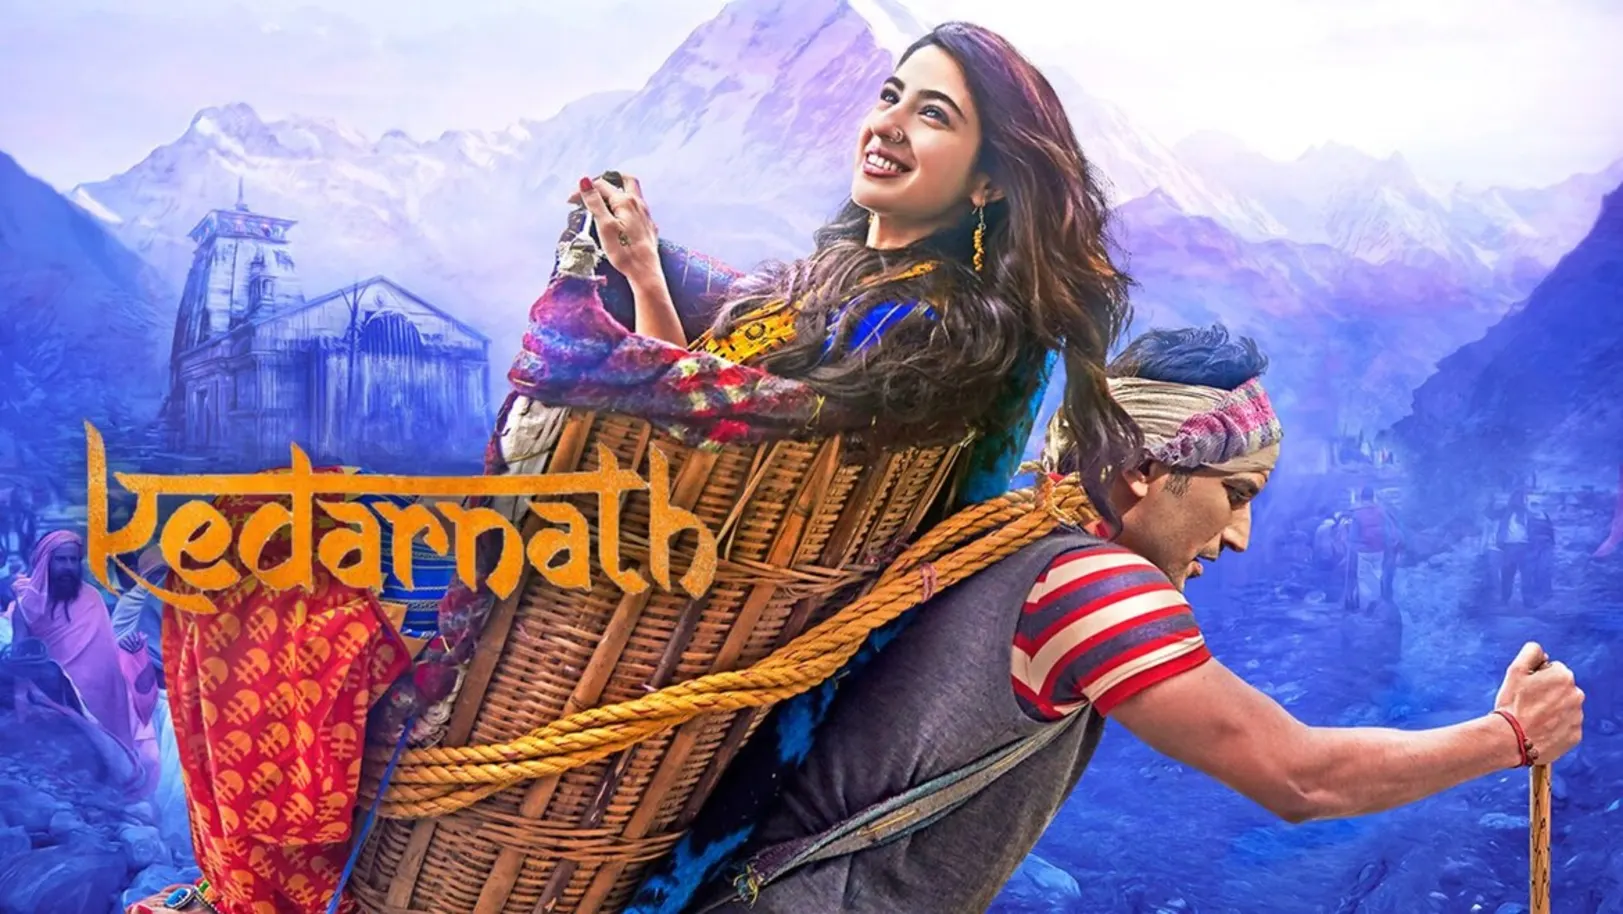 Kedarnath Streaming Now On &Pictures